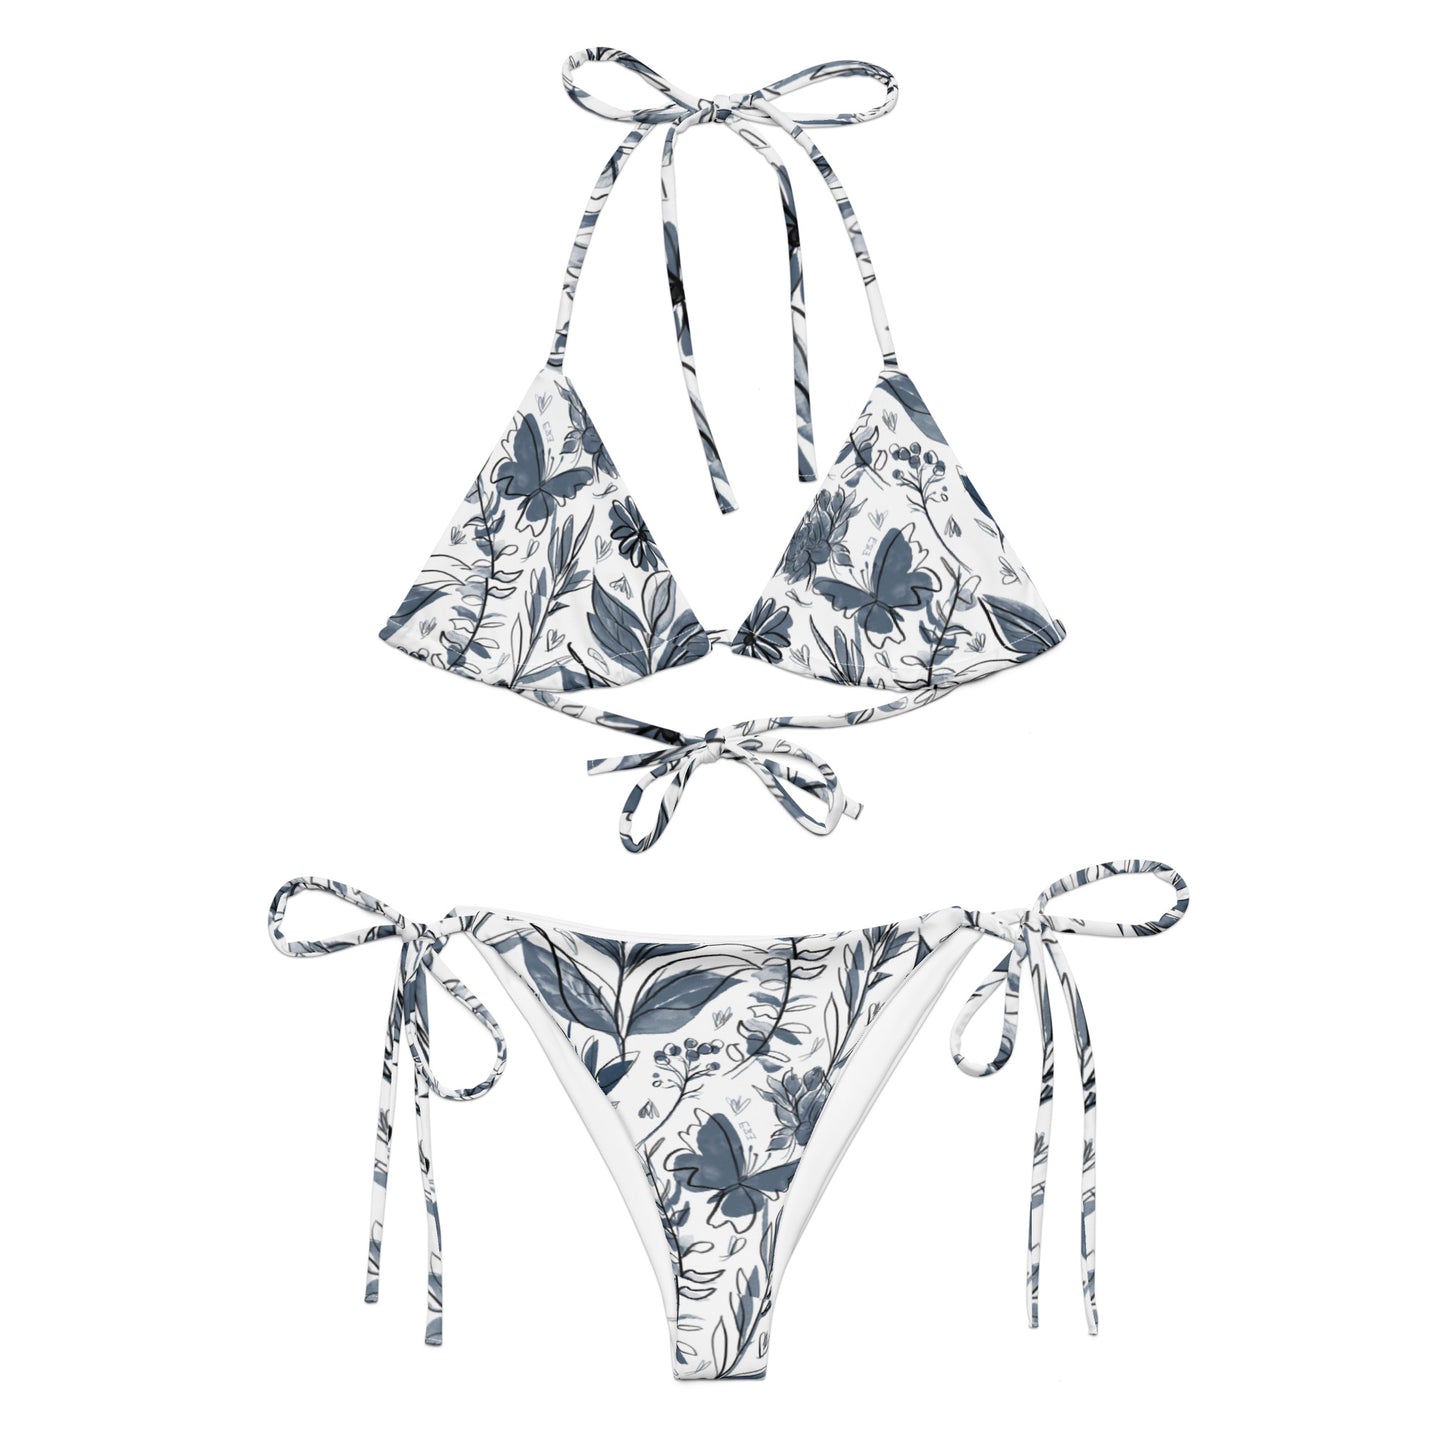 Watercolor White & Blue recycled string bikini. Houston Collection. Design hand-painted by the Designer Maria Alejandra Echenique